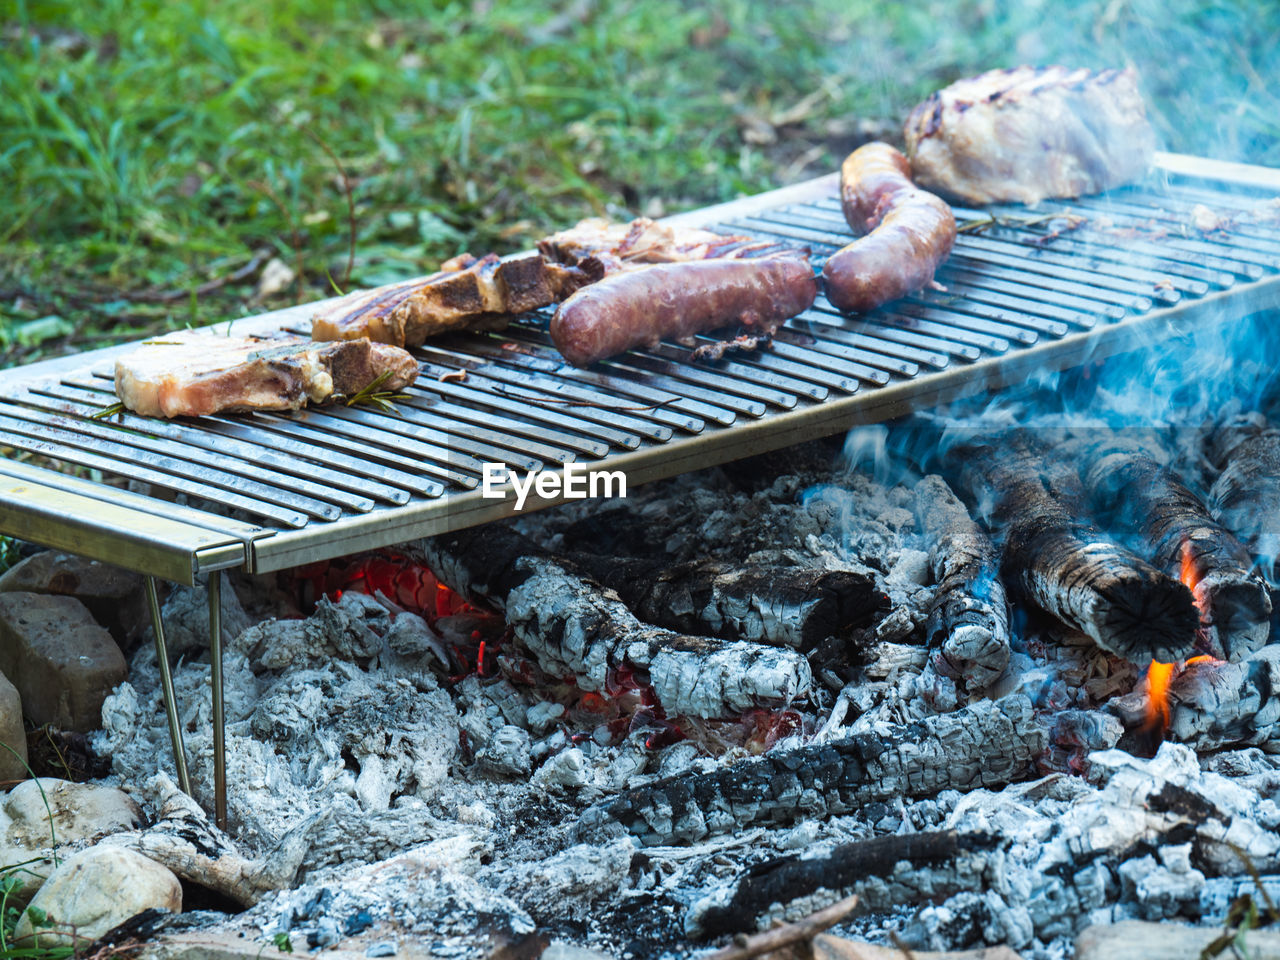 barbecue, barbecue grill, food, food and drink, heat, nature, day, meat, grilled, no people, burning, outdoors, fire, freshness, outdoor grill, grilling, flame, coal, high angle view, cuisine, sausage, land, animal, wood, dish